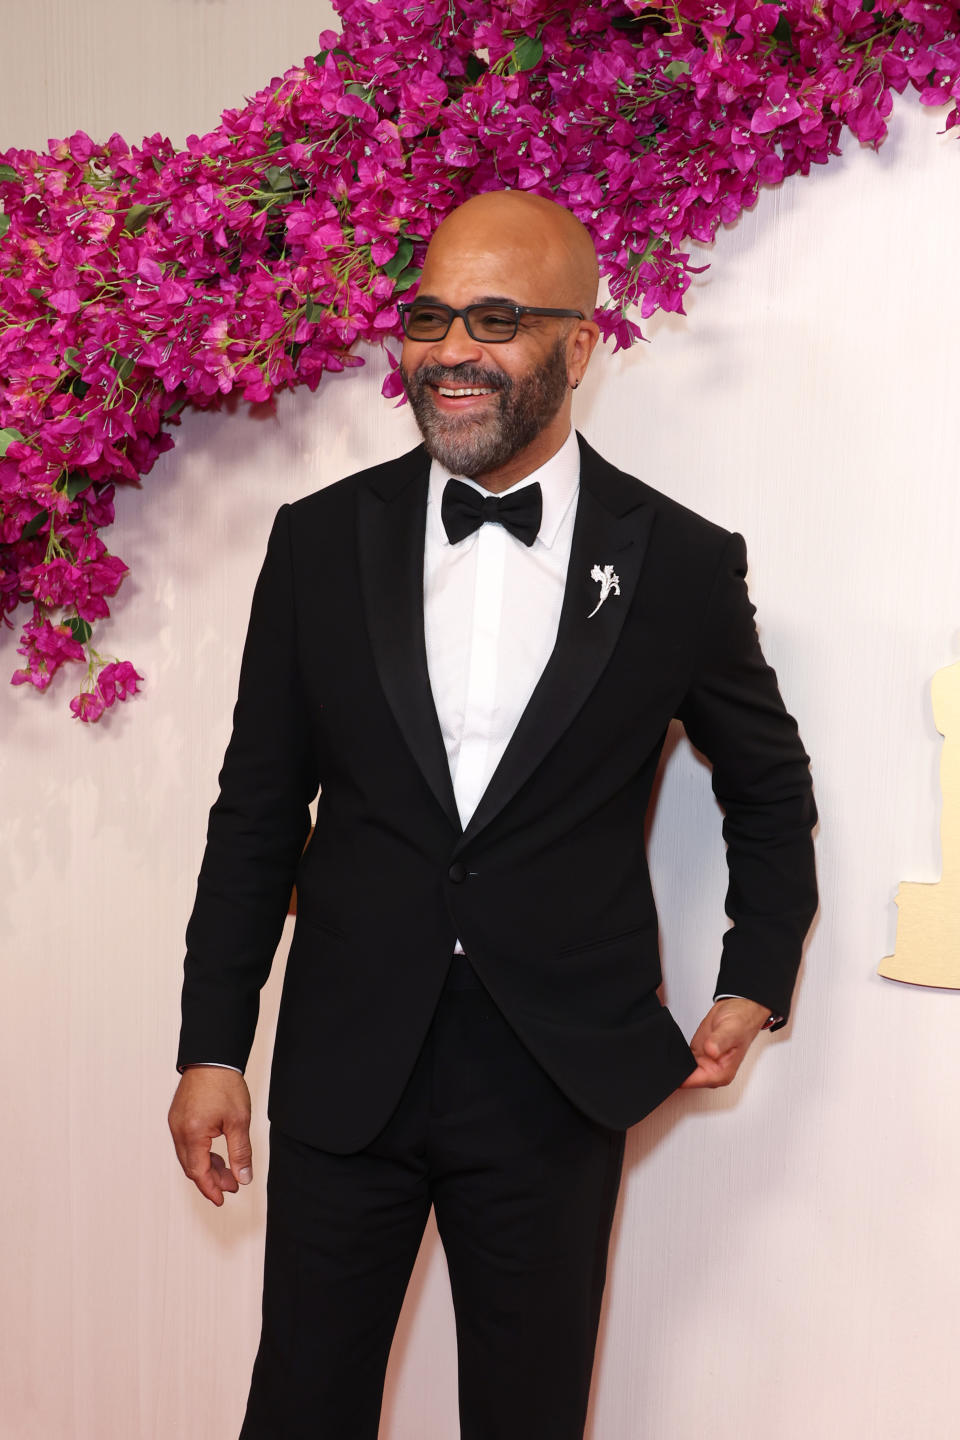 American Fiction star and nominee Jeffrey Wright looked sharp in his black tux. Photo: Getty